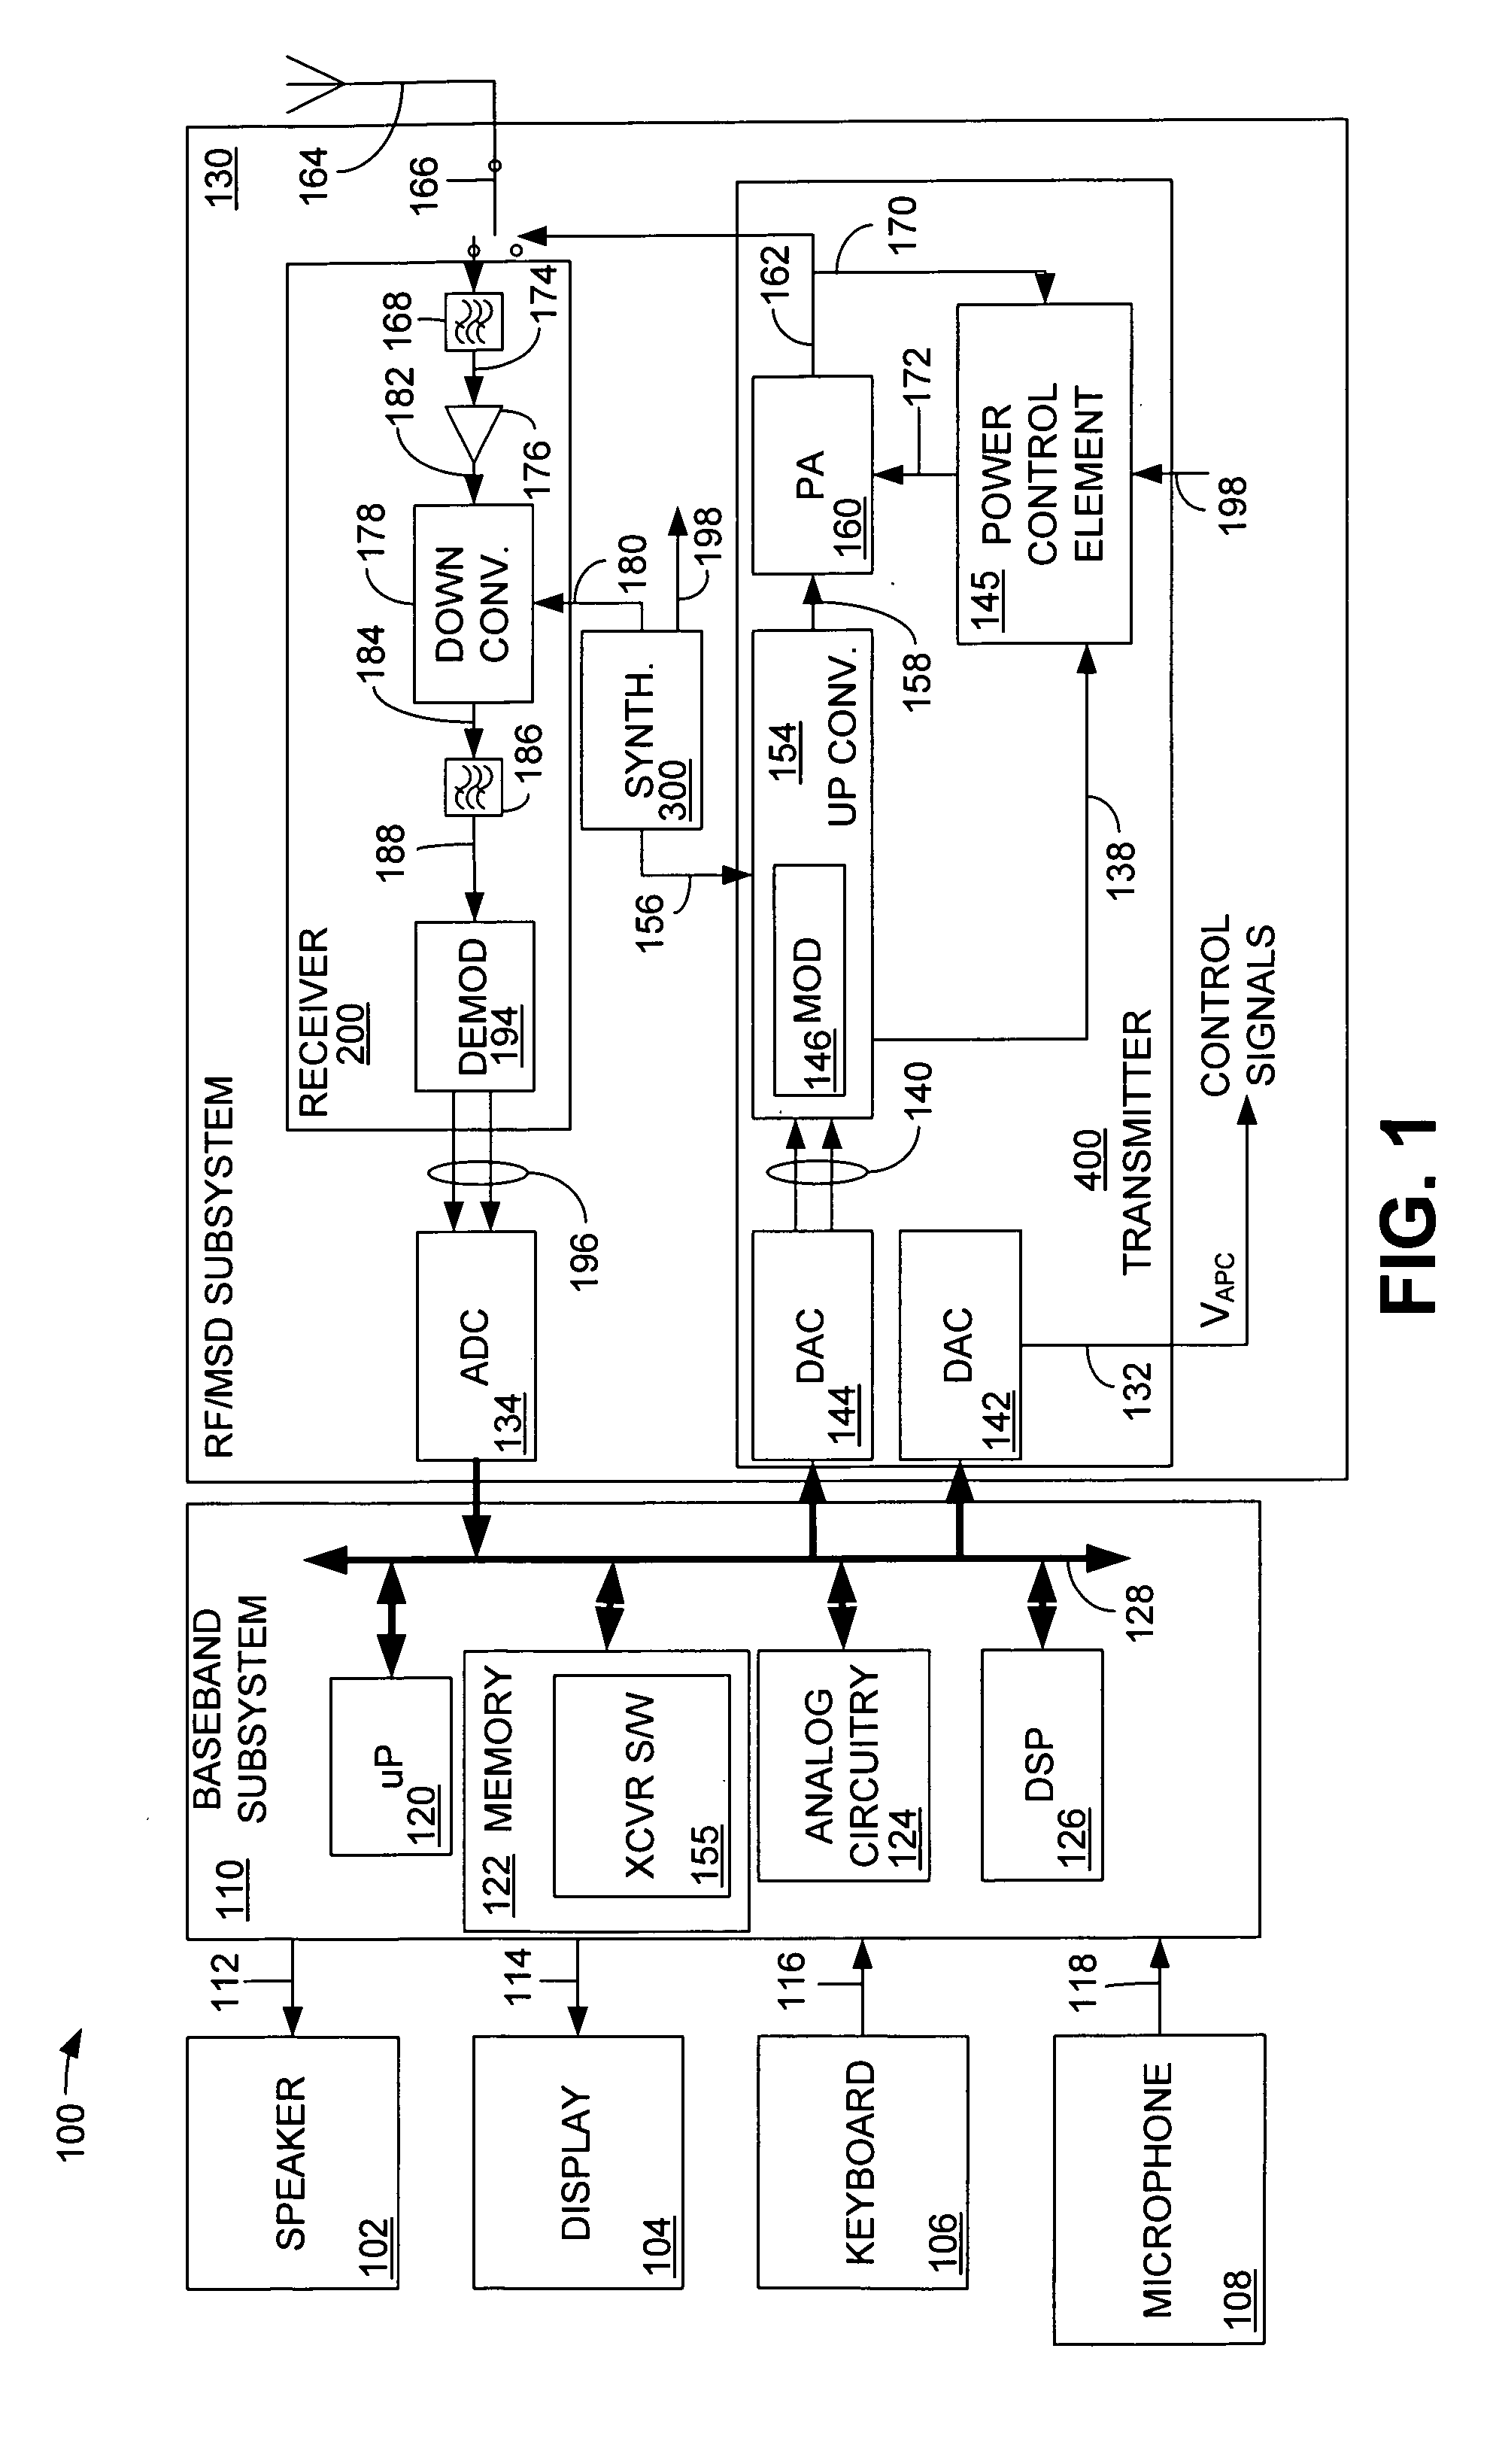 Single chip GSM/EDGE transceiver architecture with closed loop power control